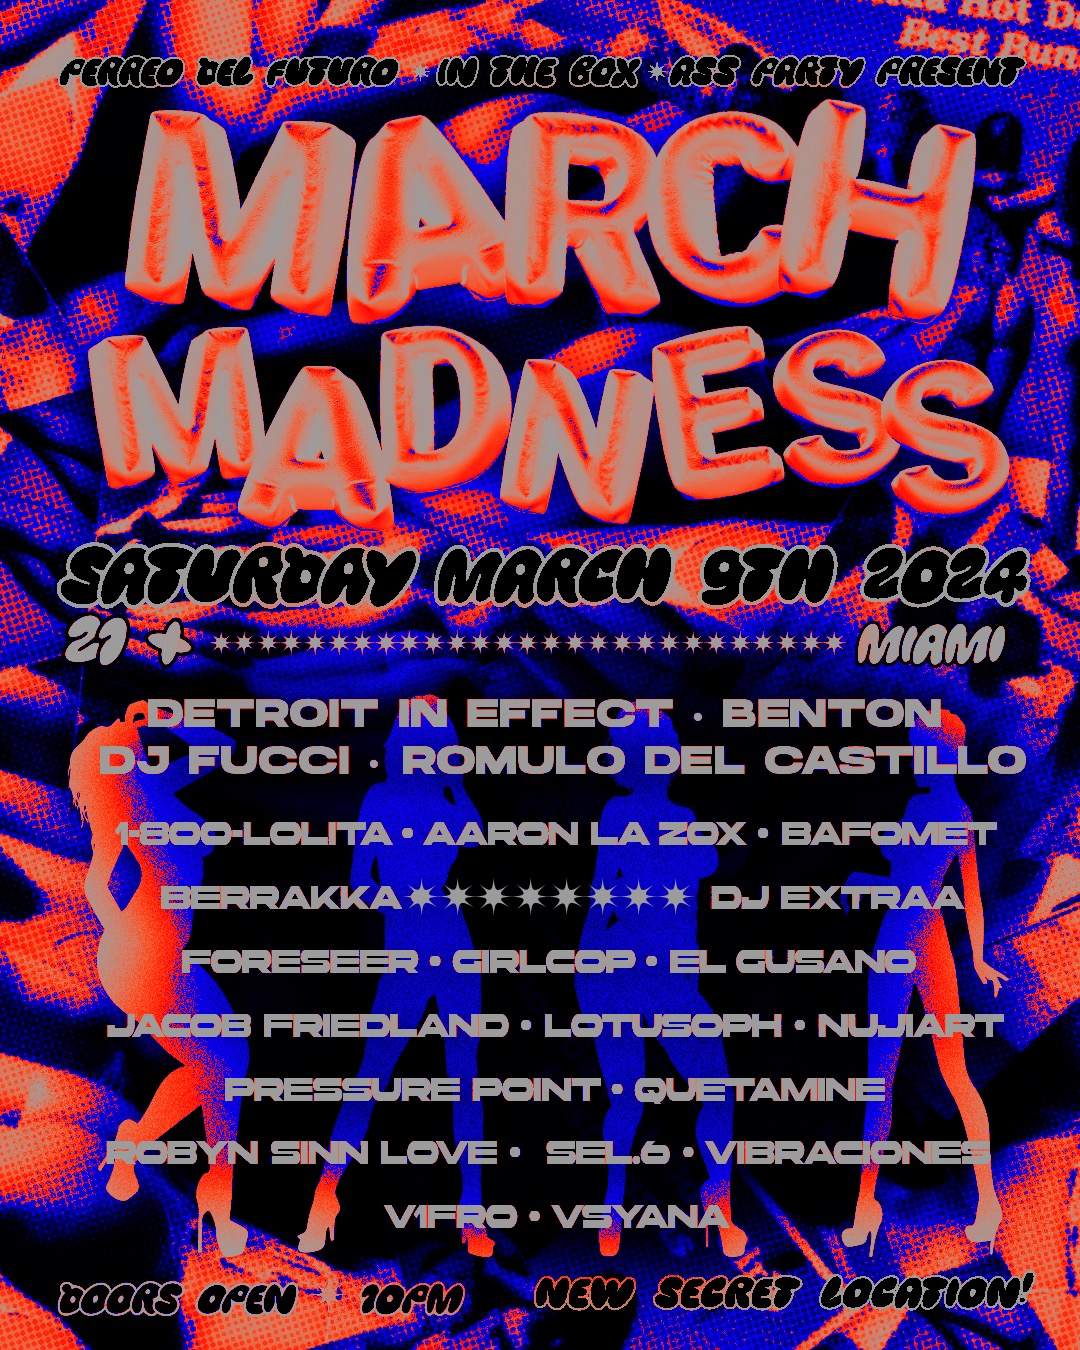 March Madness: Detroit In Effect, Dj Fucci, and 20+ other local artists - フライヤー表